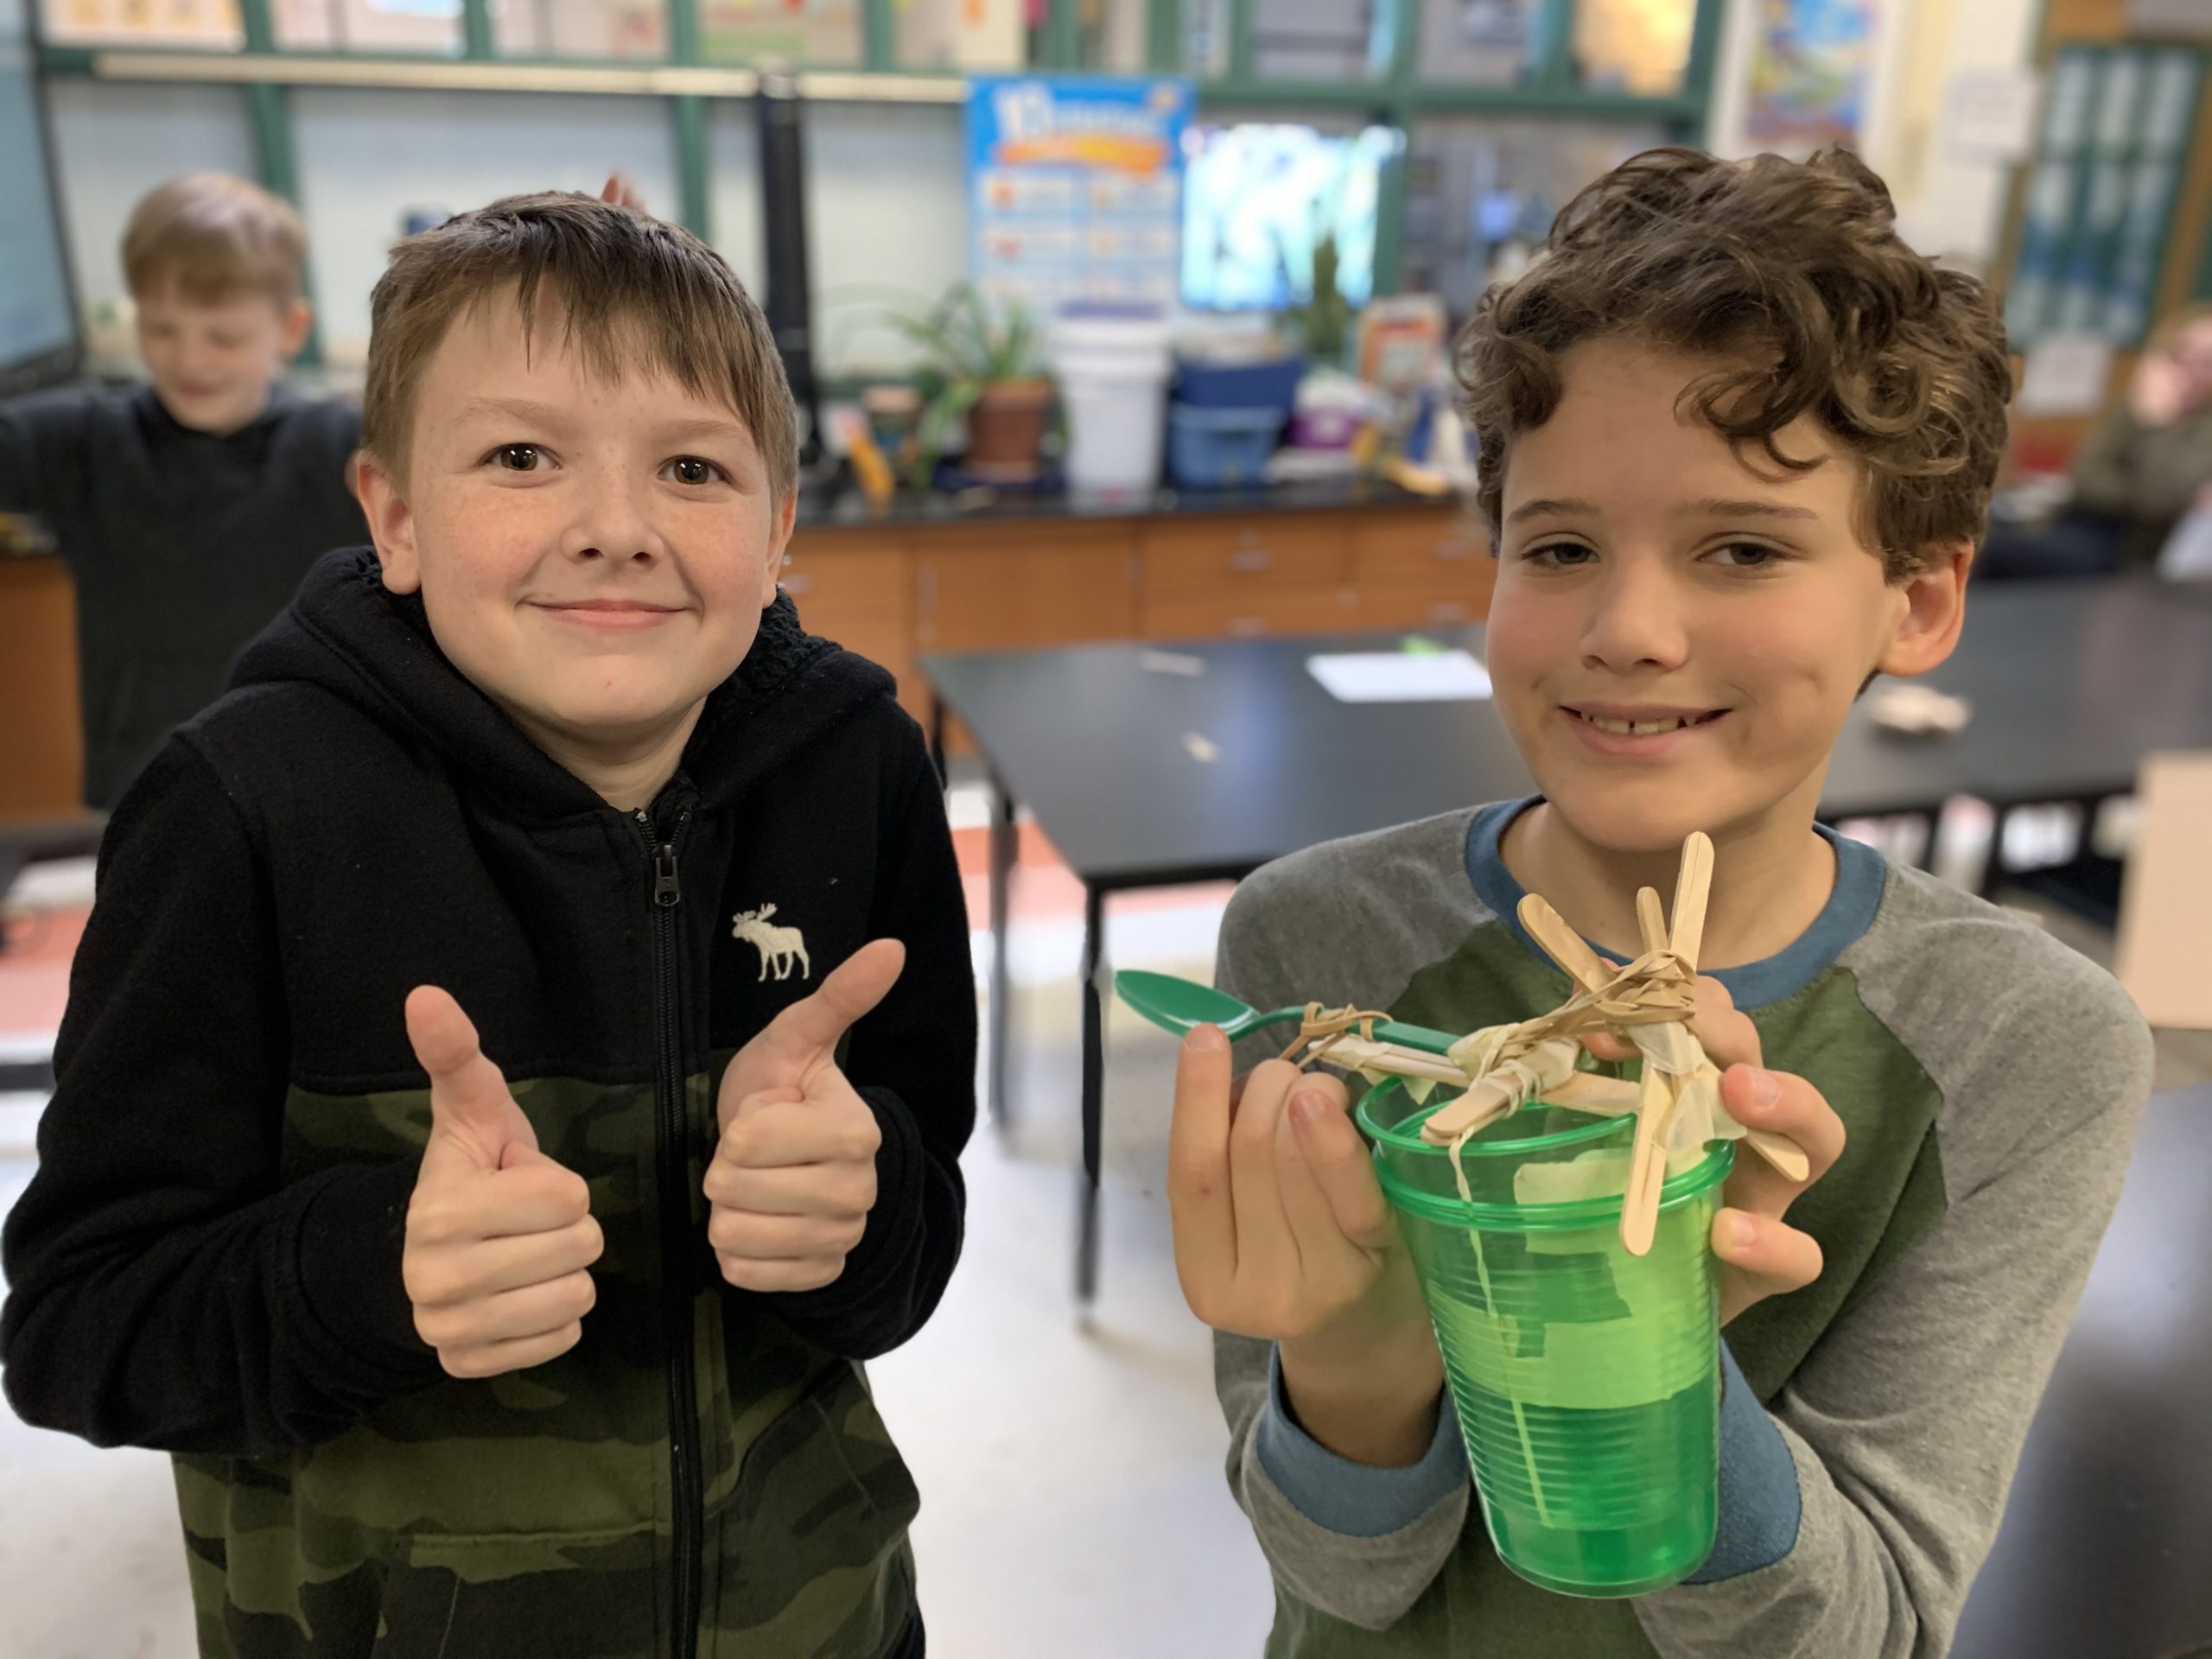 East Quogue Elementary School sixth graders are exploring how catapults changed warfare in ancient Greece by engineering their own catapults with a limited set of supplies.  Ari Firestein and Aidan Judd, right, with their design.